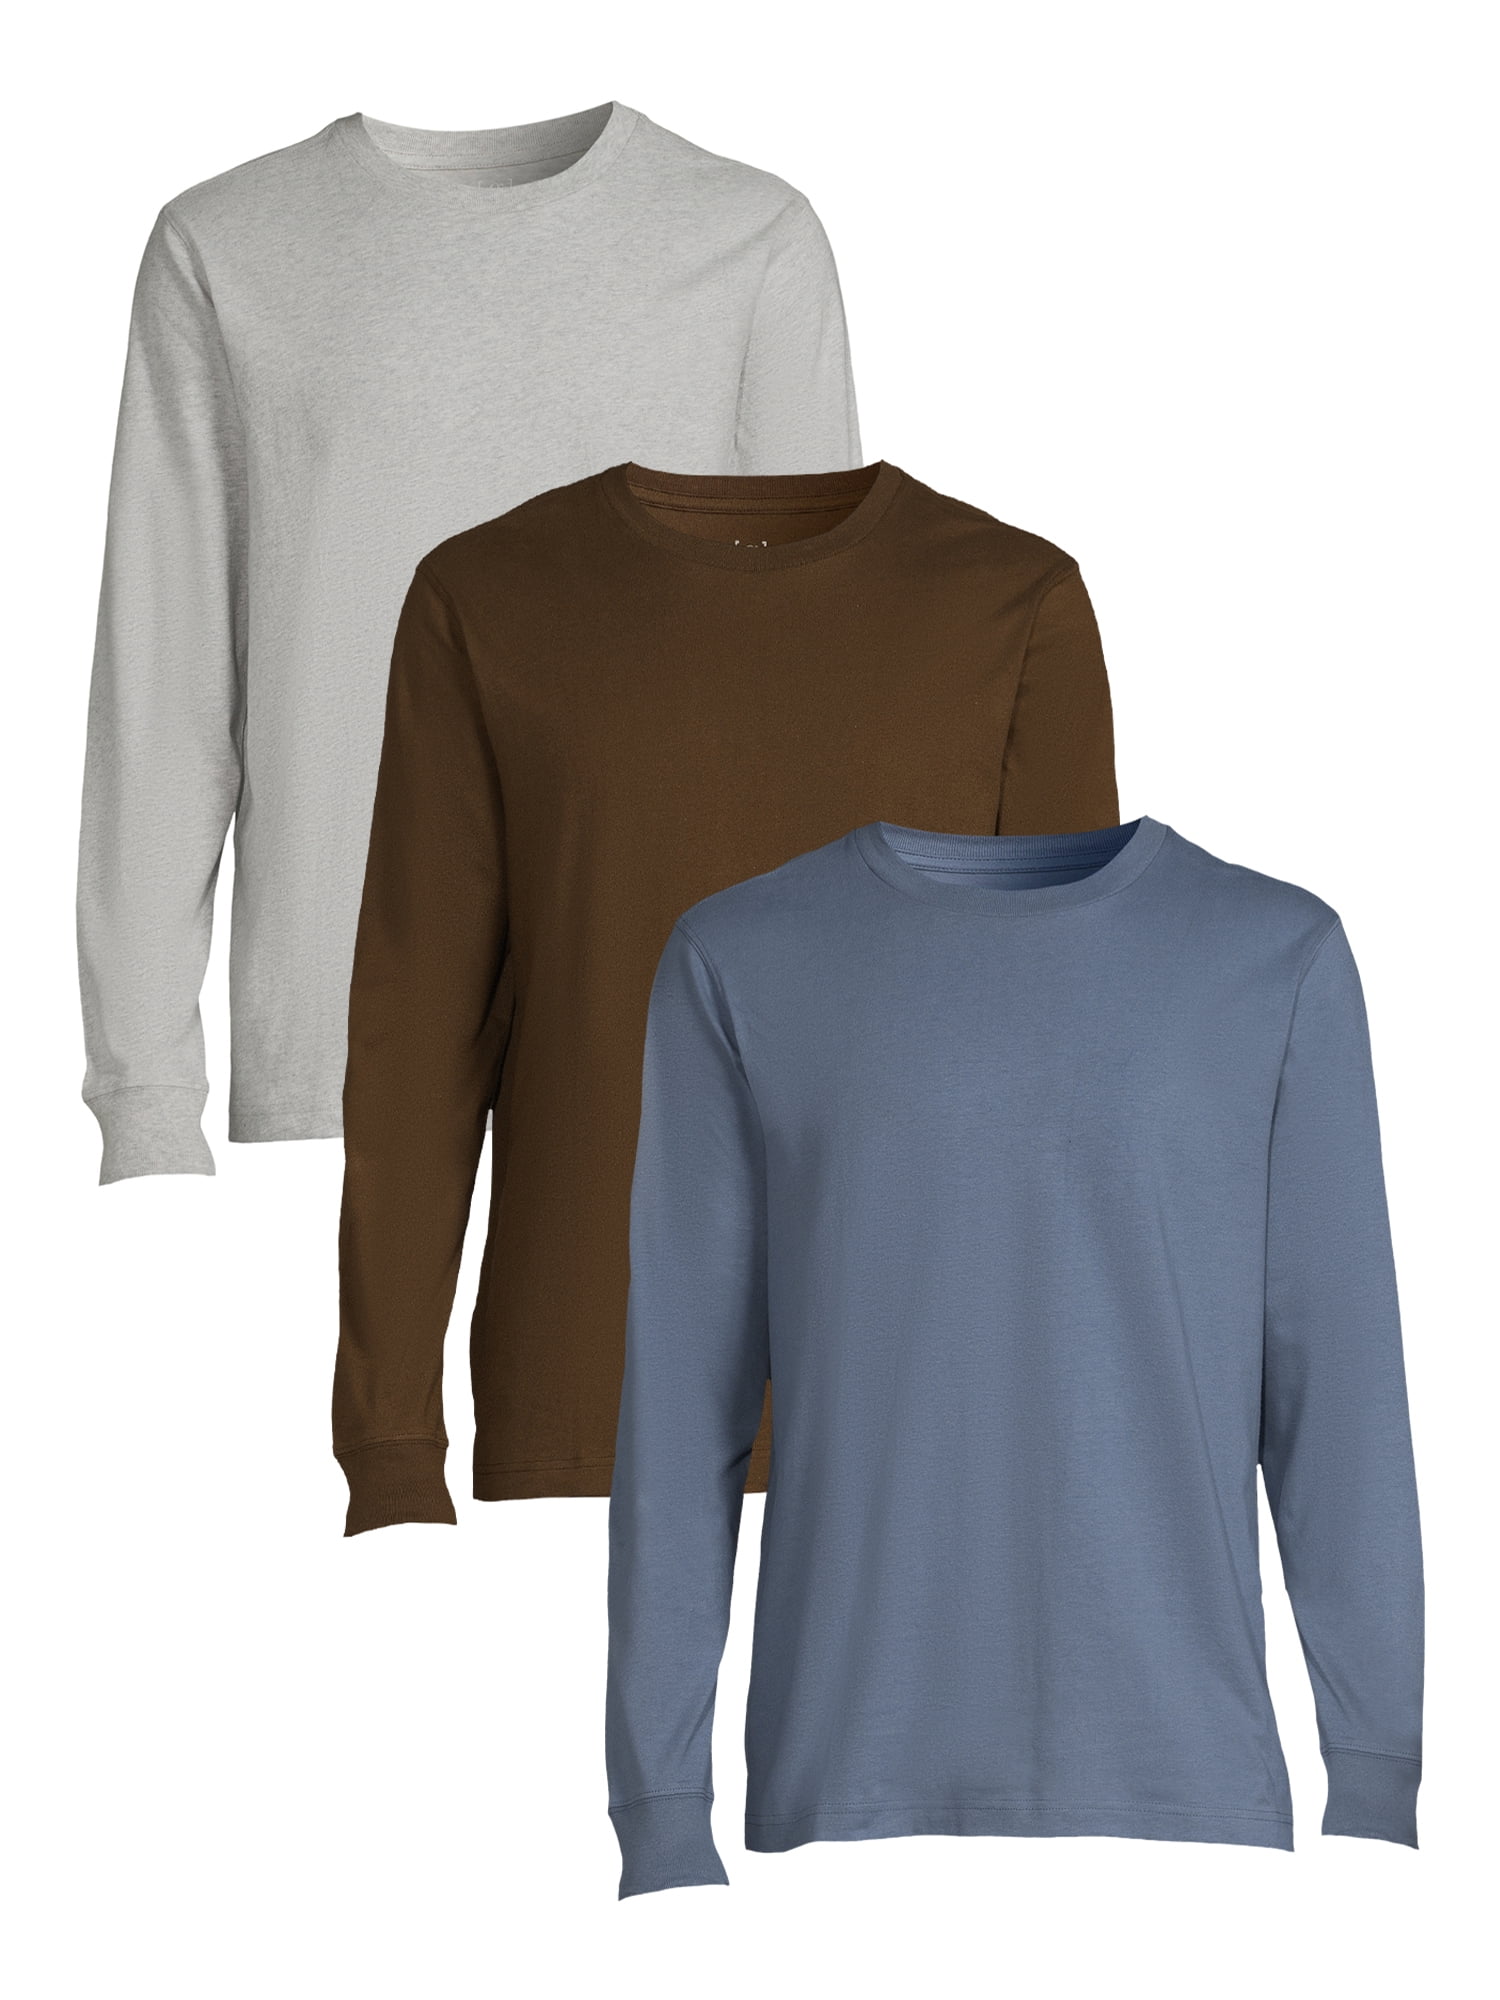 George Men's and Big Men’s Long Sleeve Crewneck T-Shirts, 3-Pack, Sizes ...